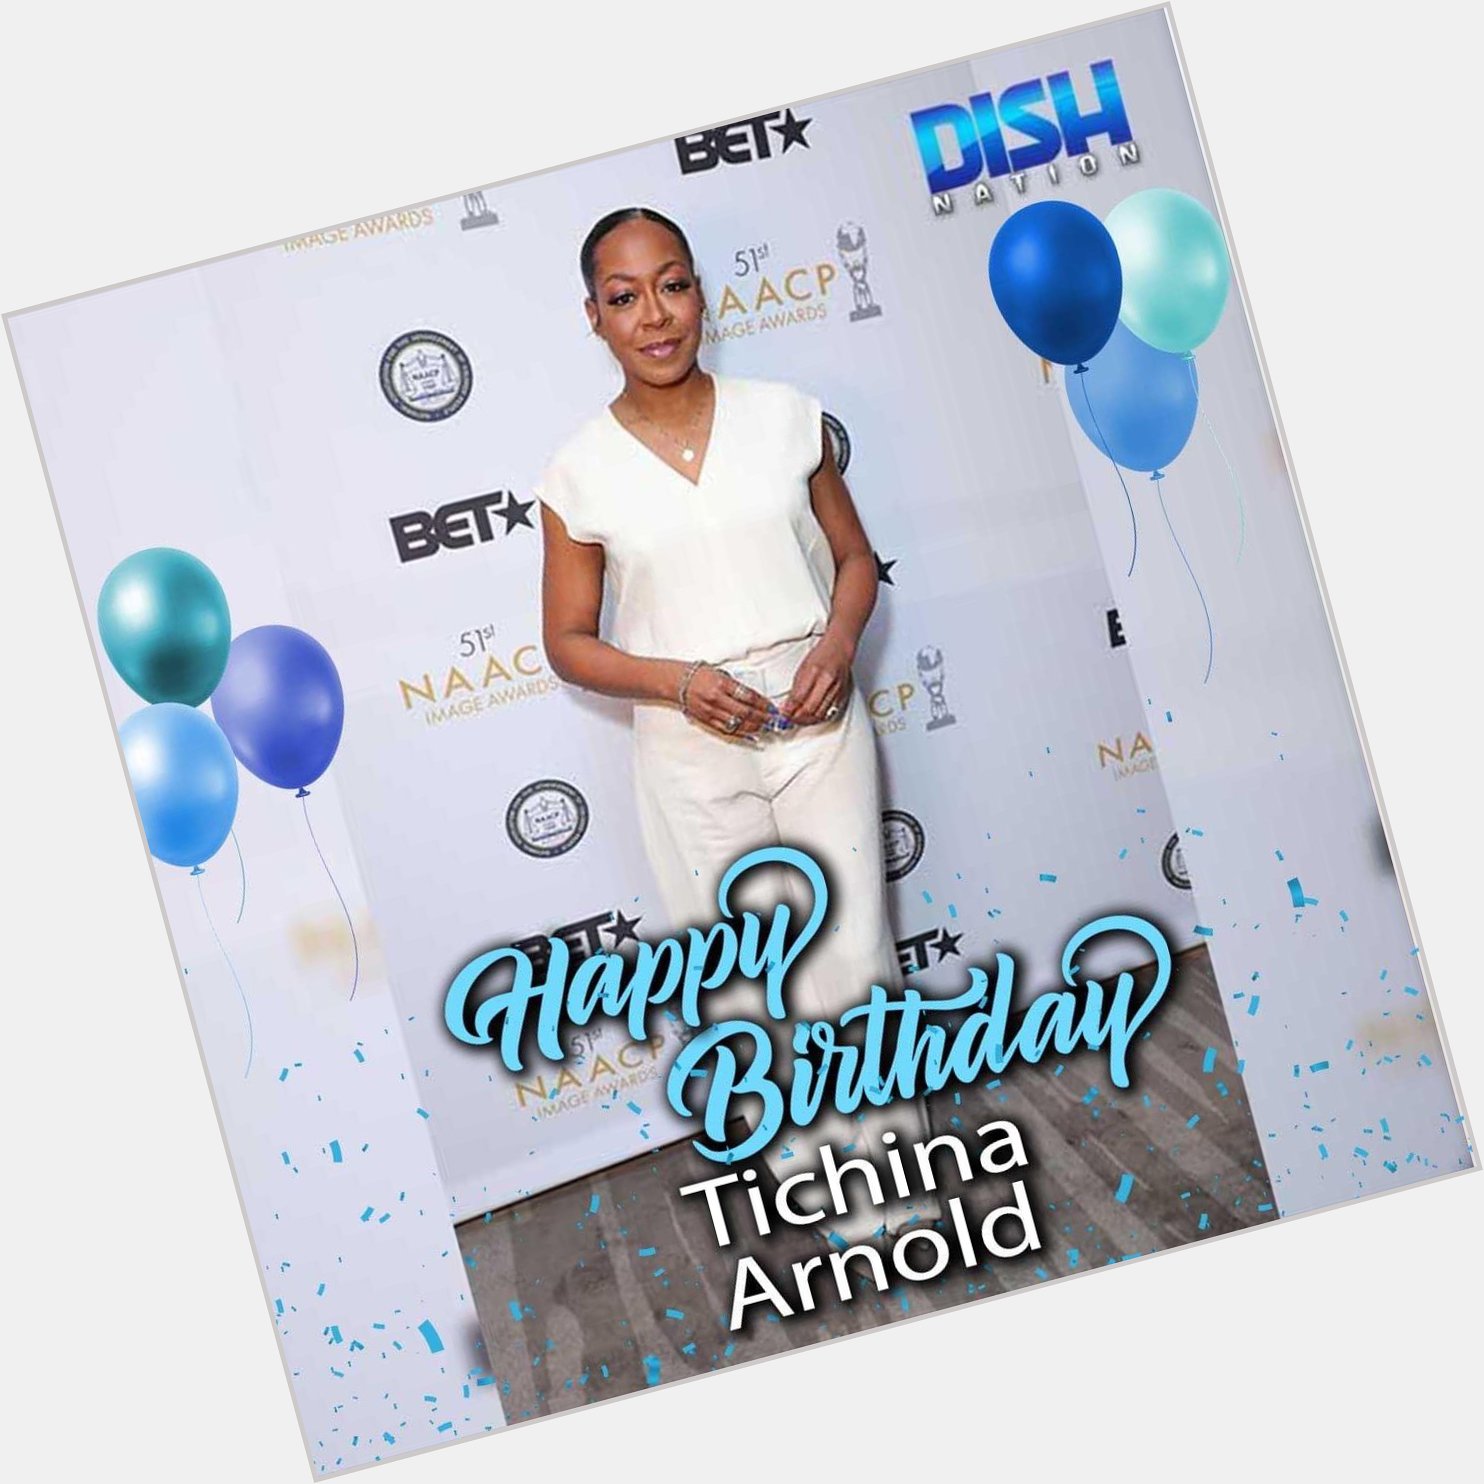 Happy Birthday to Tichina Arnold! Enjoy your special day. 